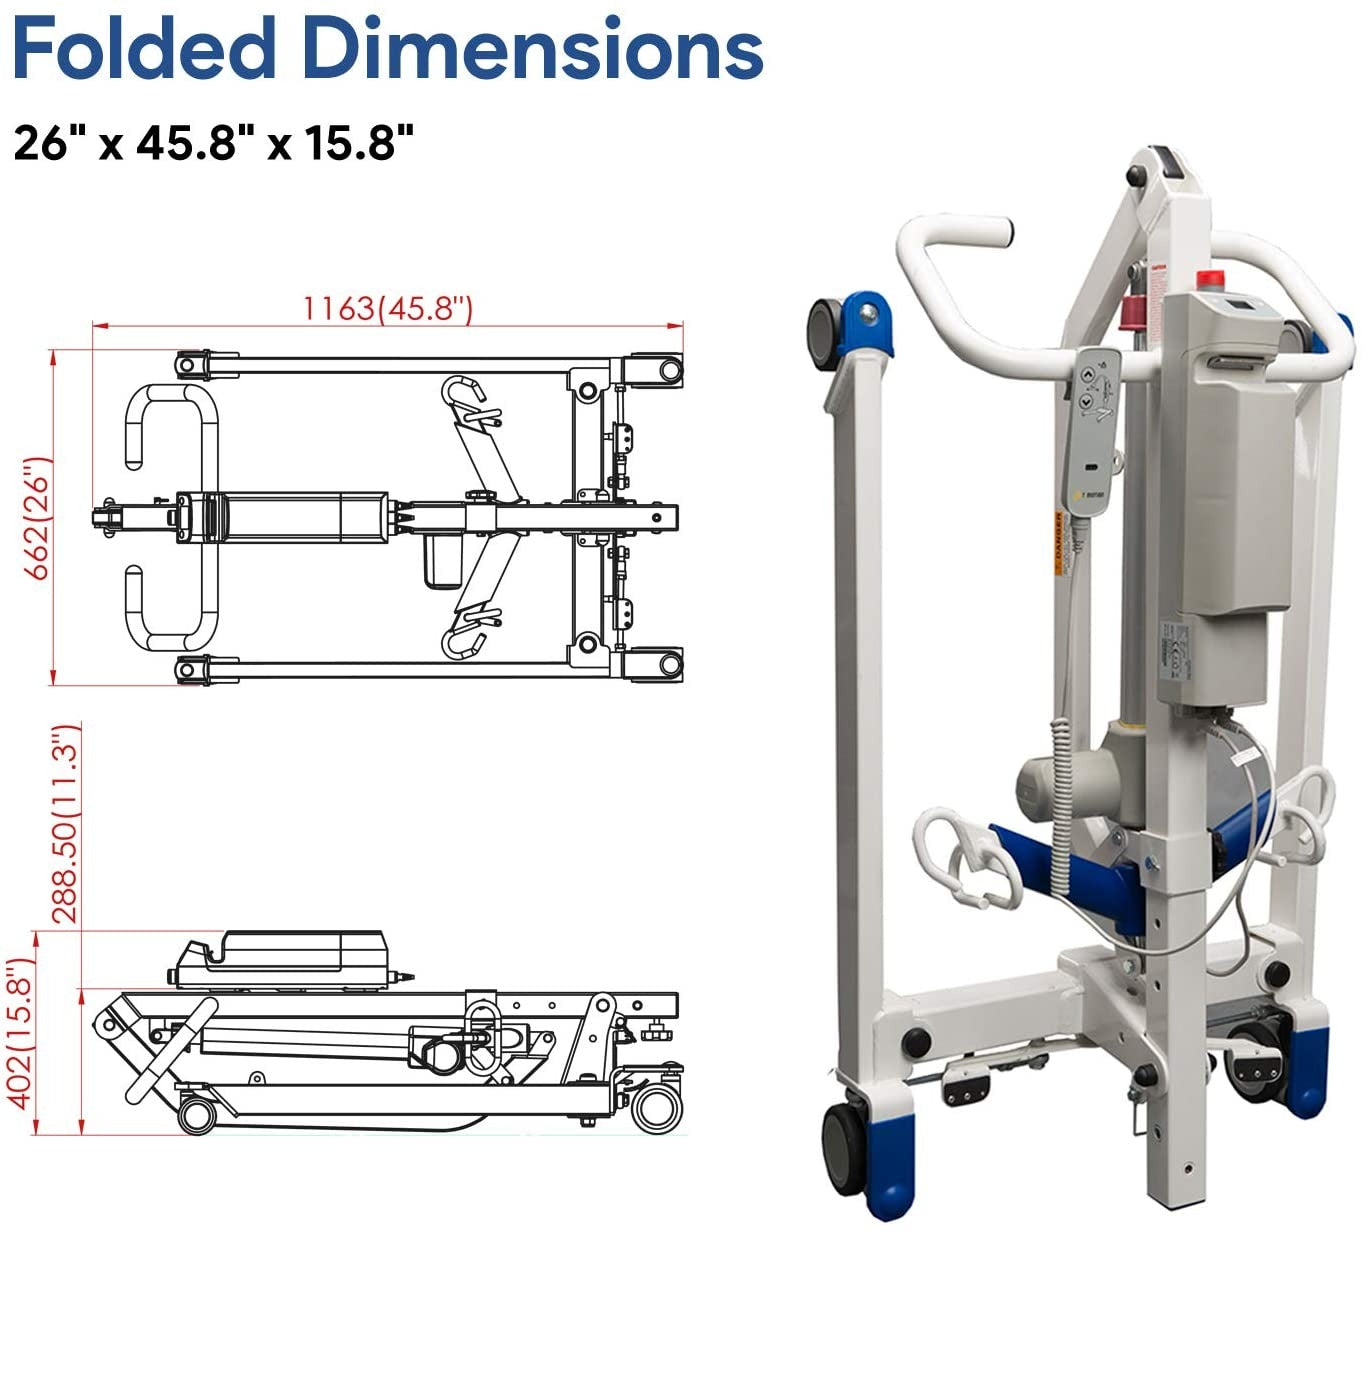 Protekt® Take-A-Long Folding Electric Patient Lift folded dimensions 